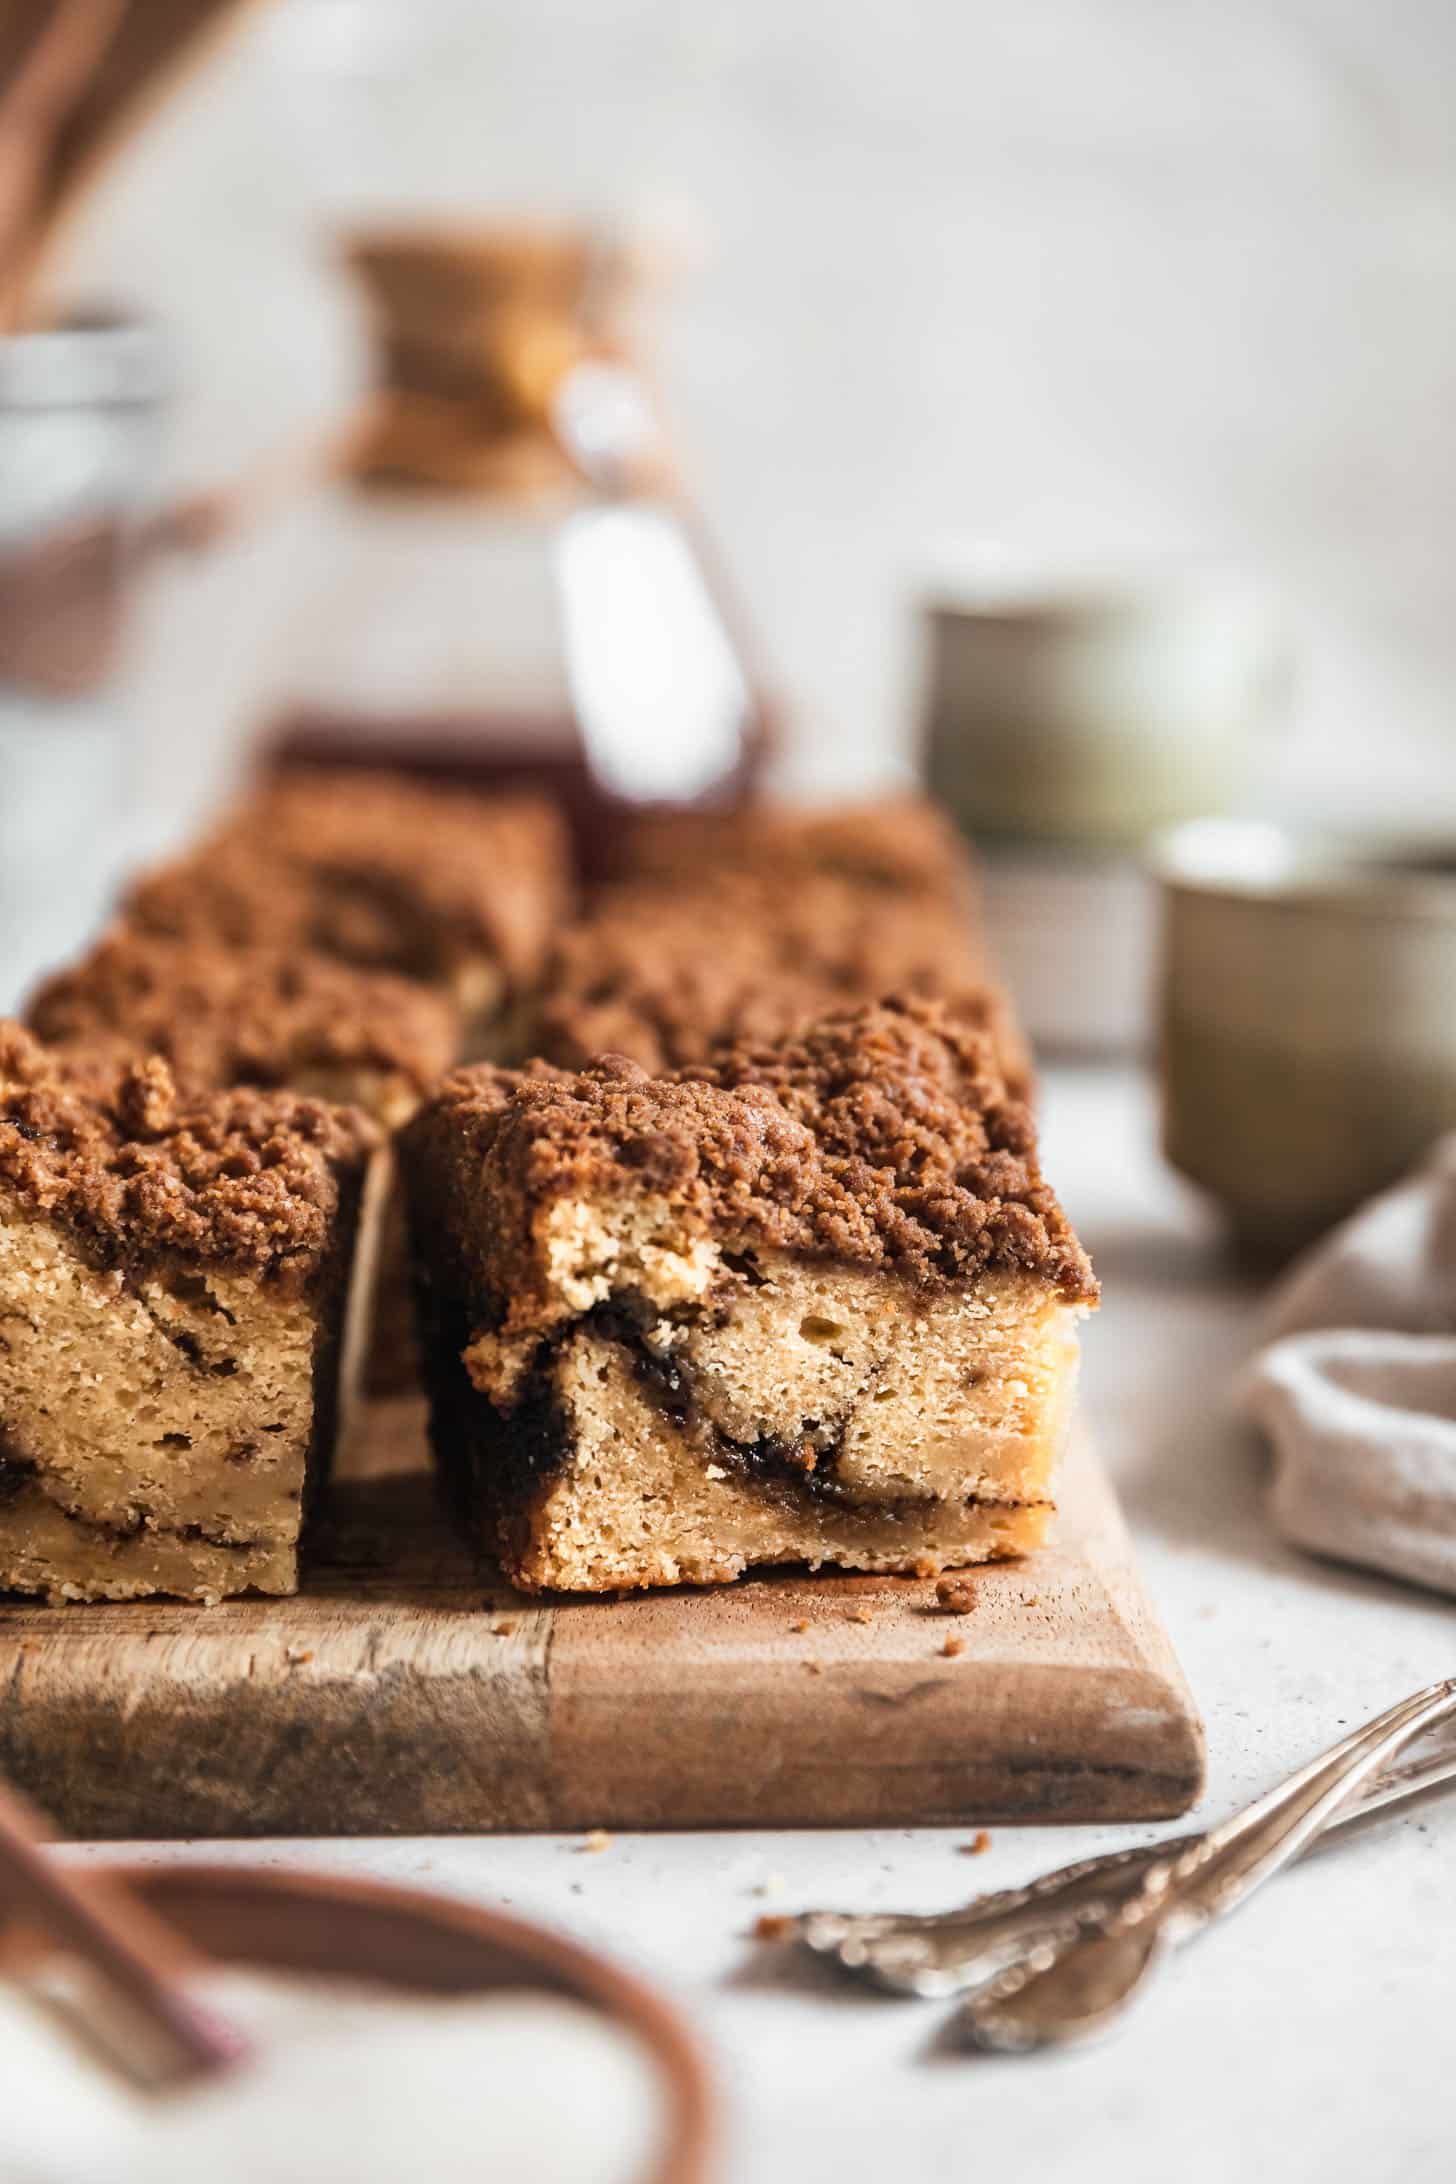 Ideas for a Cocktail Party | Brown butter banana coffee cake on a wood board next to coffee cups, a Chemex, and vintage forks with a white background.